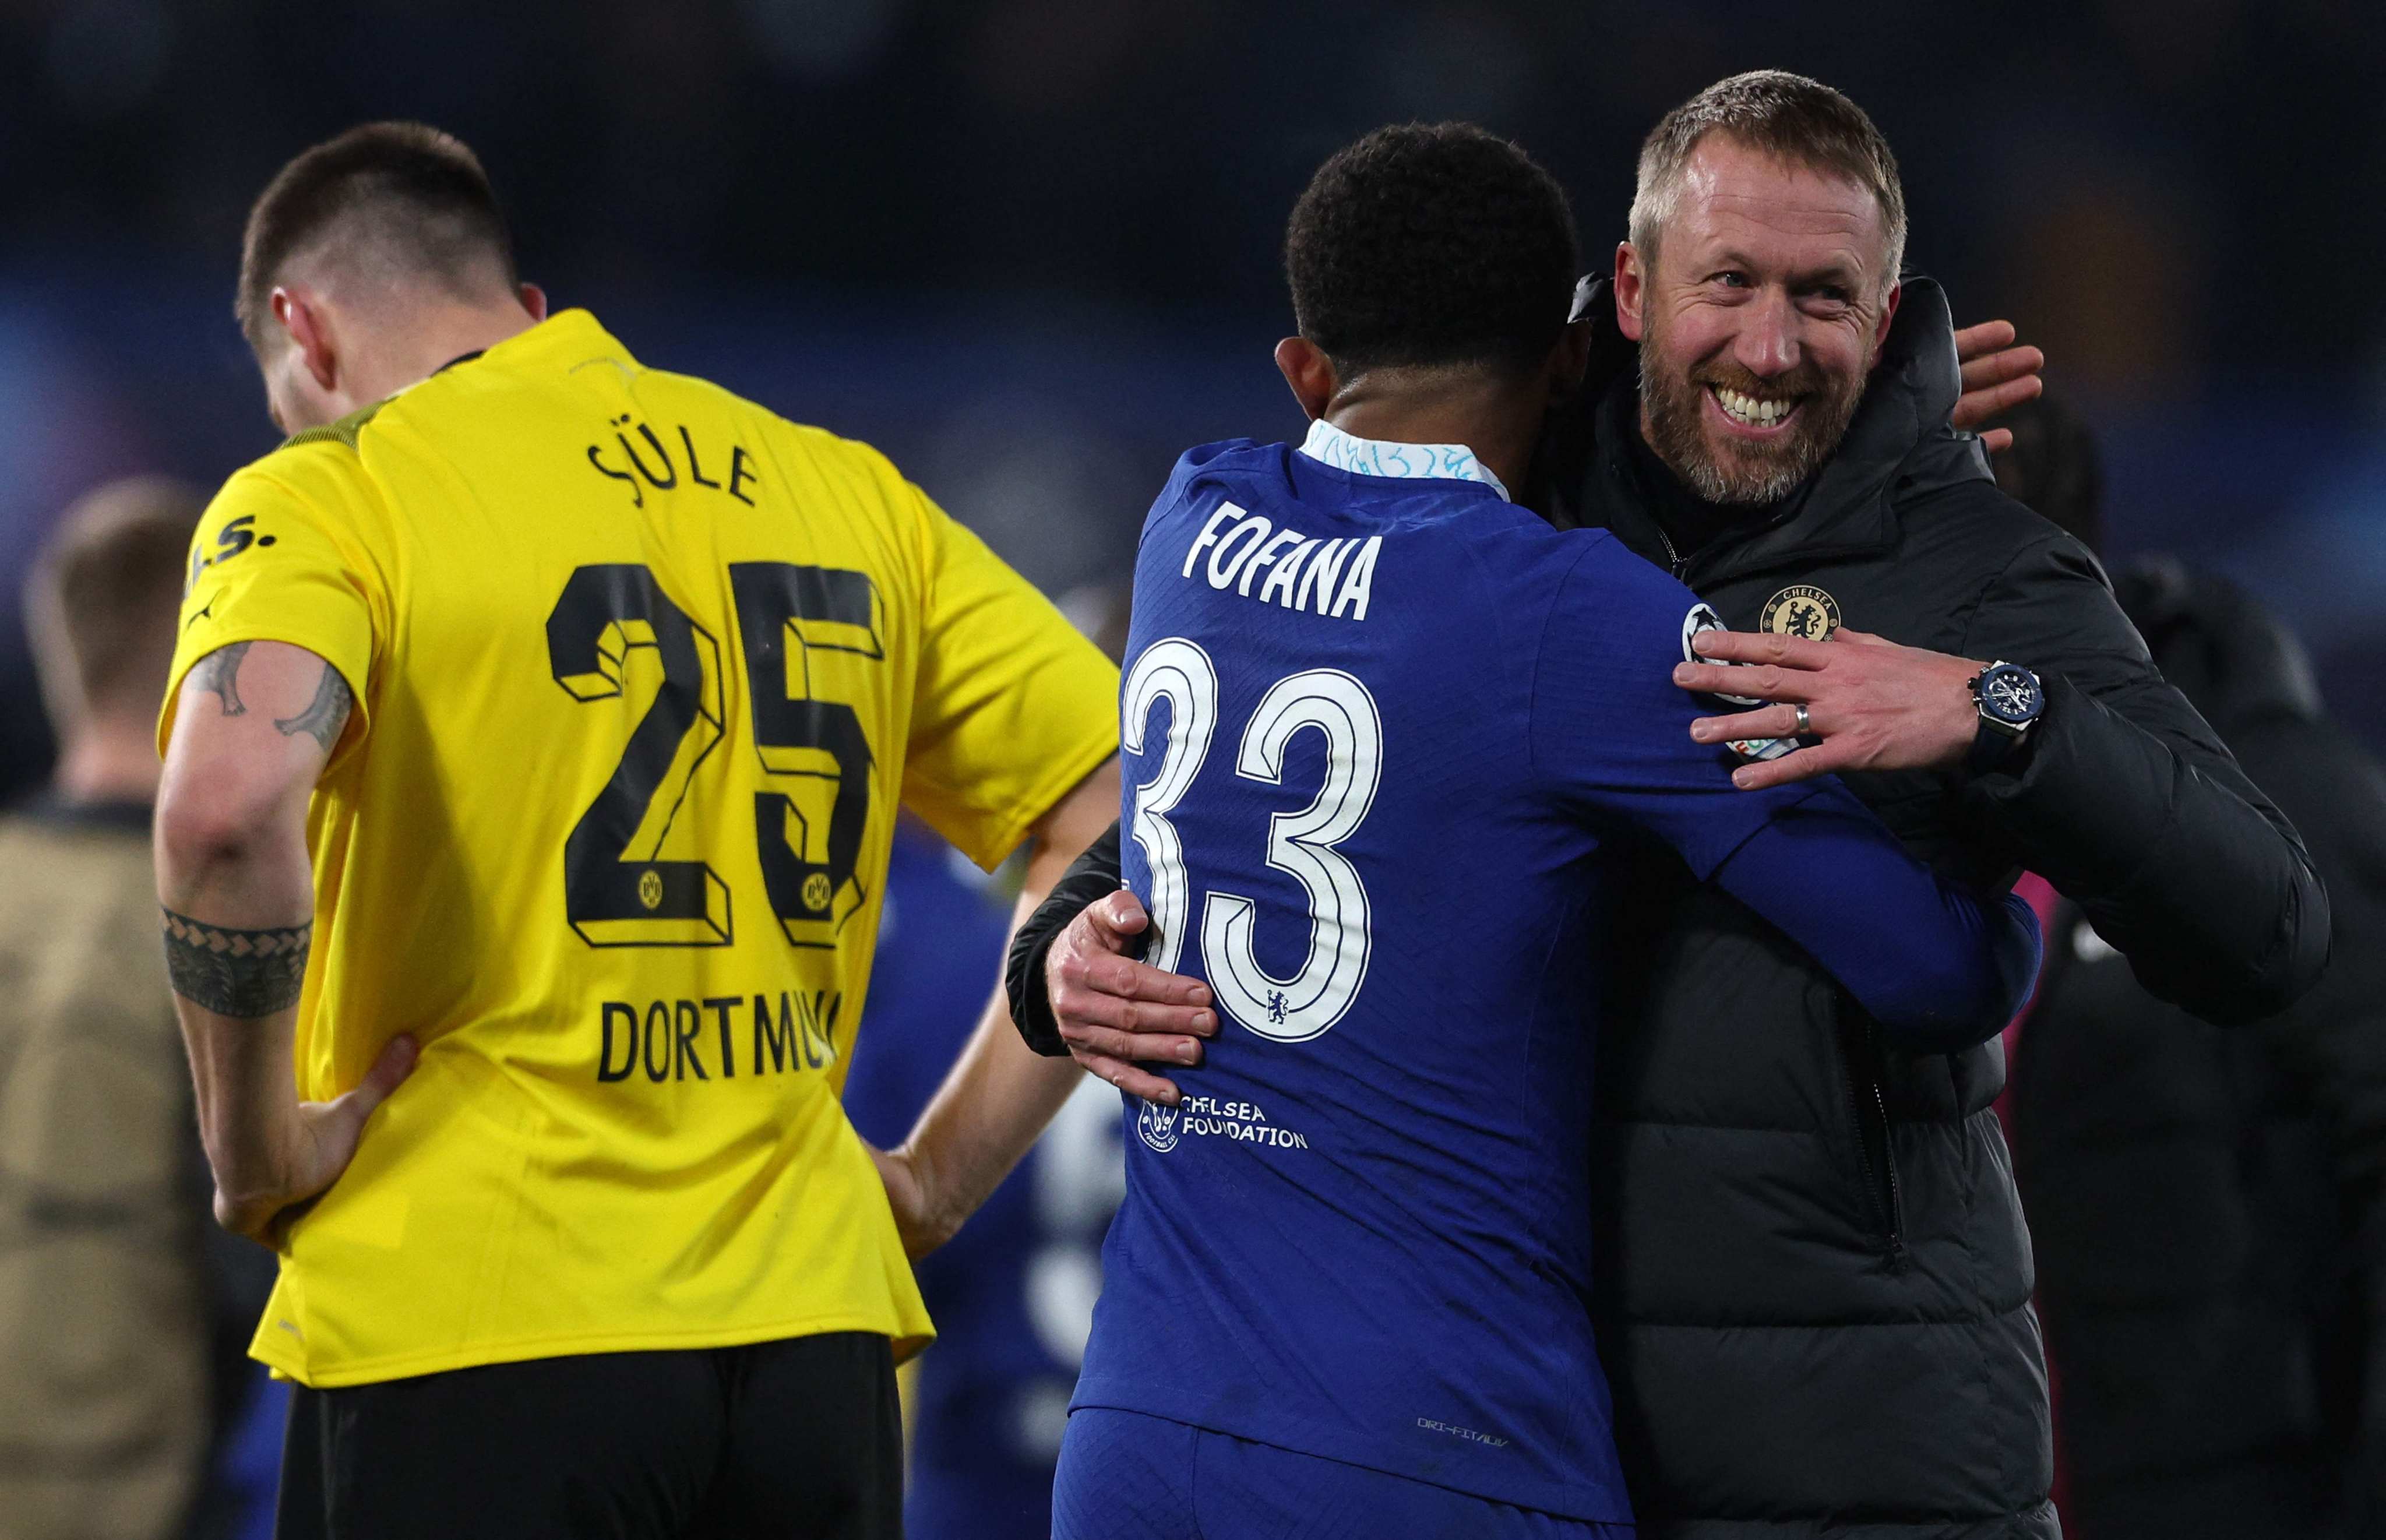 Chelsea head coach Graham Potter celebrates with defender Wesley Fofana after their Uefa Champions League round of 16 second-leg win against Borrusia Dortmund at Stamford Bridge. Photo: AFP